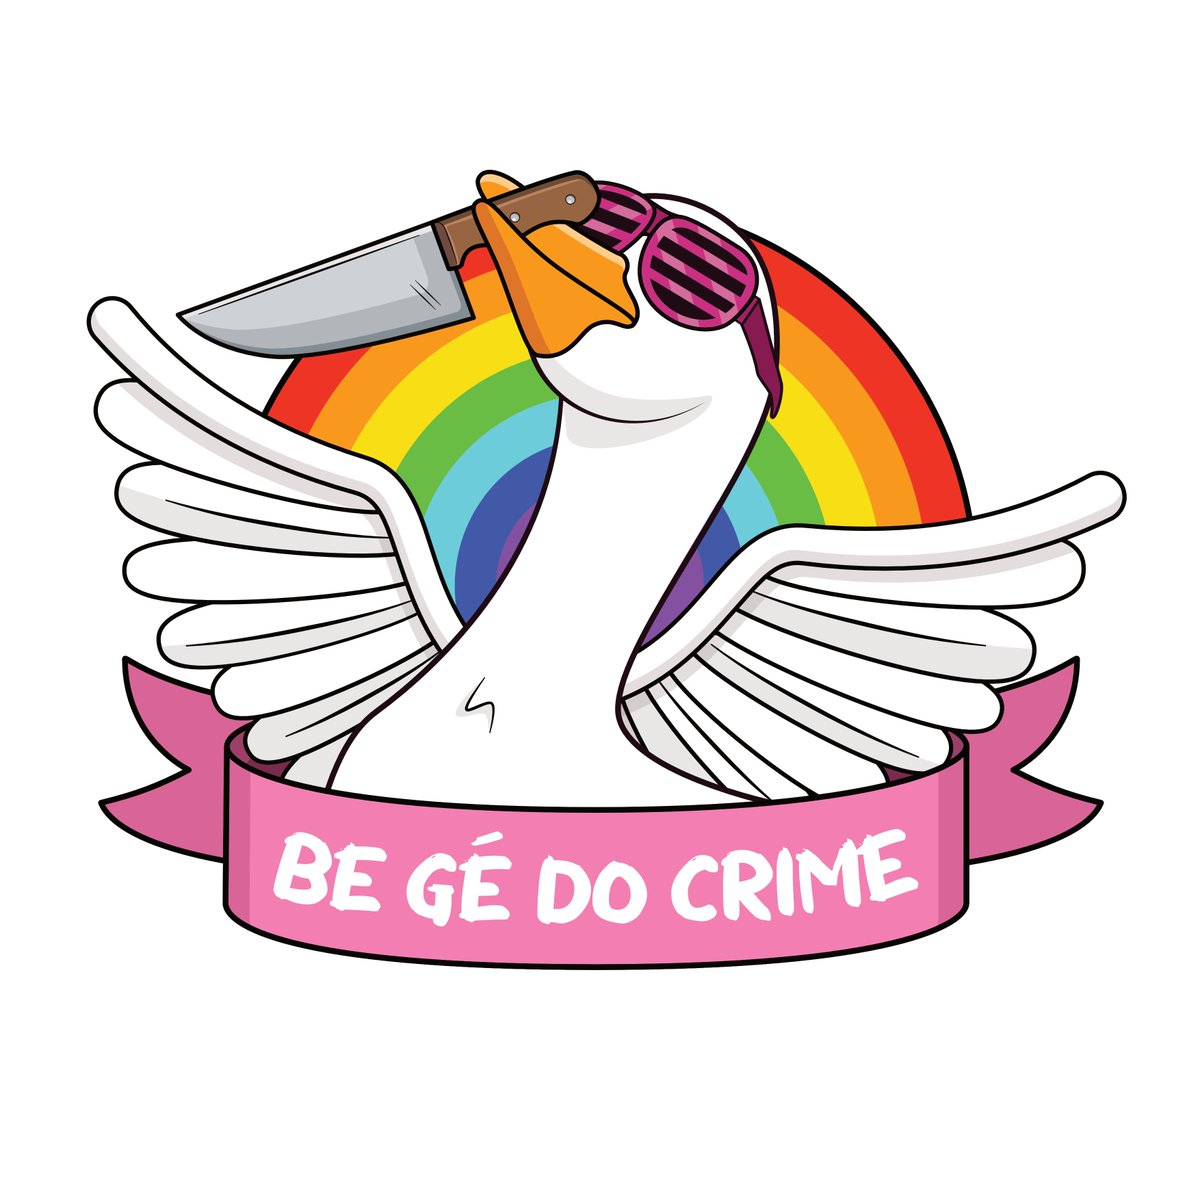 A couple more tweaks and I think this Goose will be ready for @dublincomicarts 
I'm thinking: badges, stickers, prints for the event and t-shirts online because he works good on many colour backgrounds! #IrishPun #BeGayDoCrime #LGBTQ